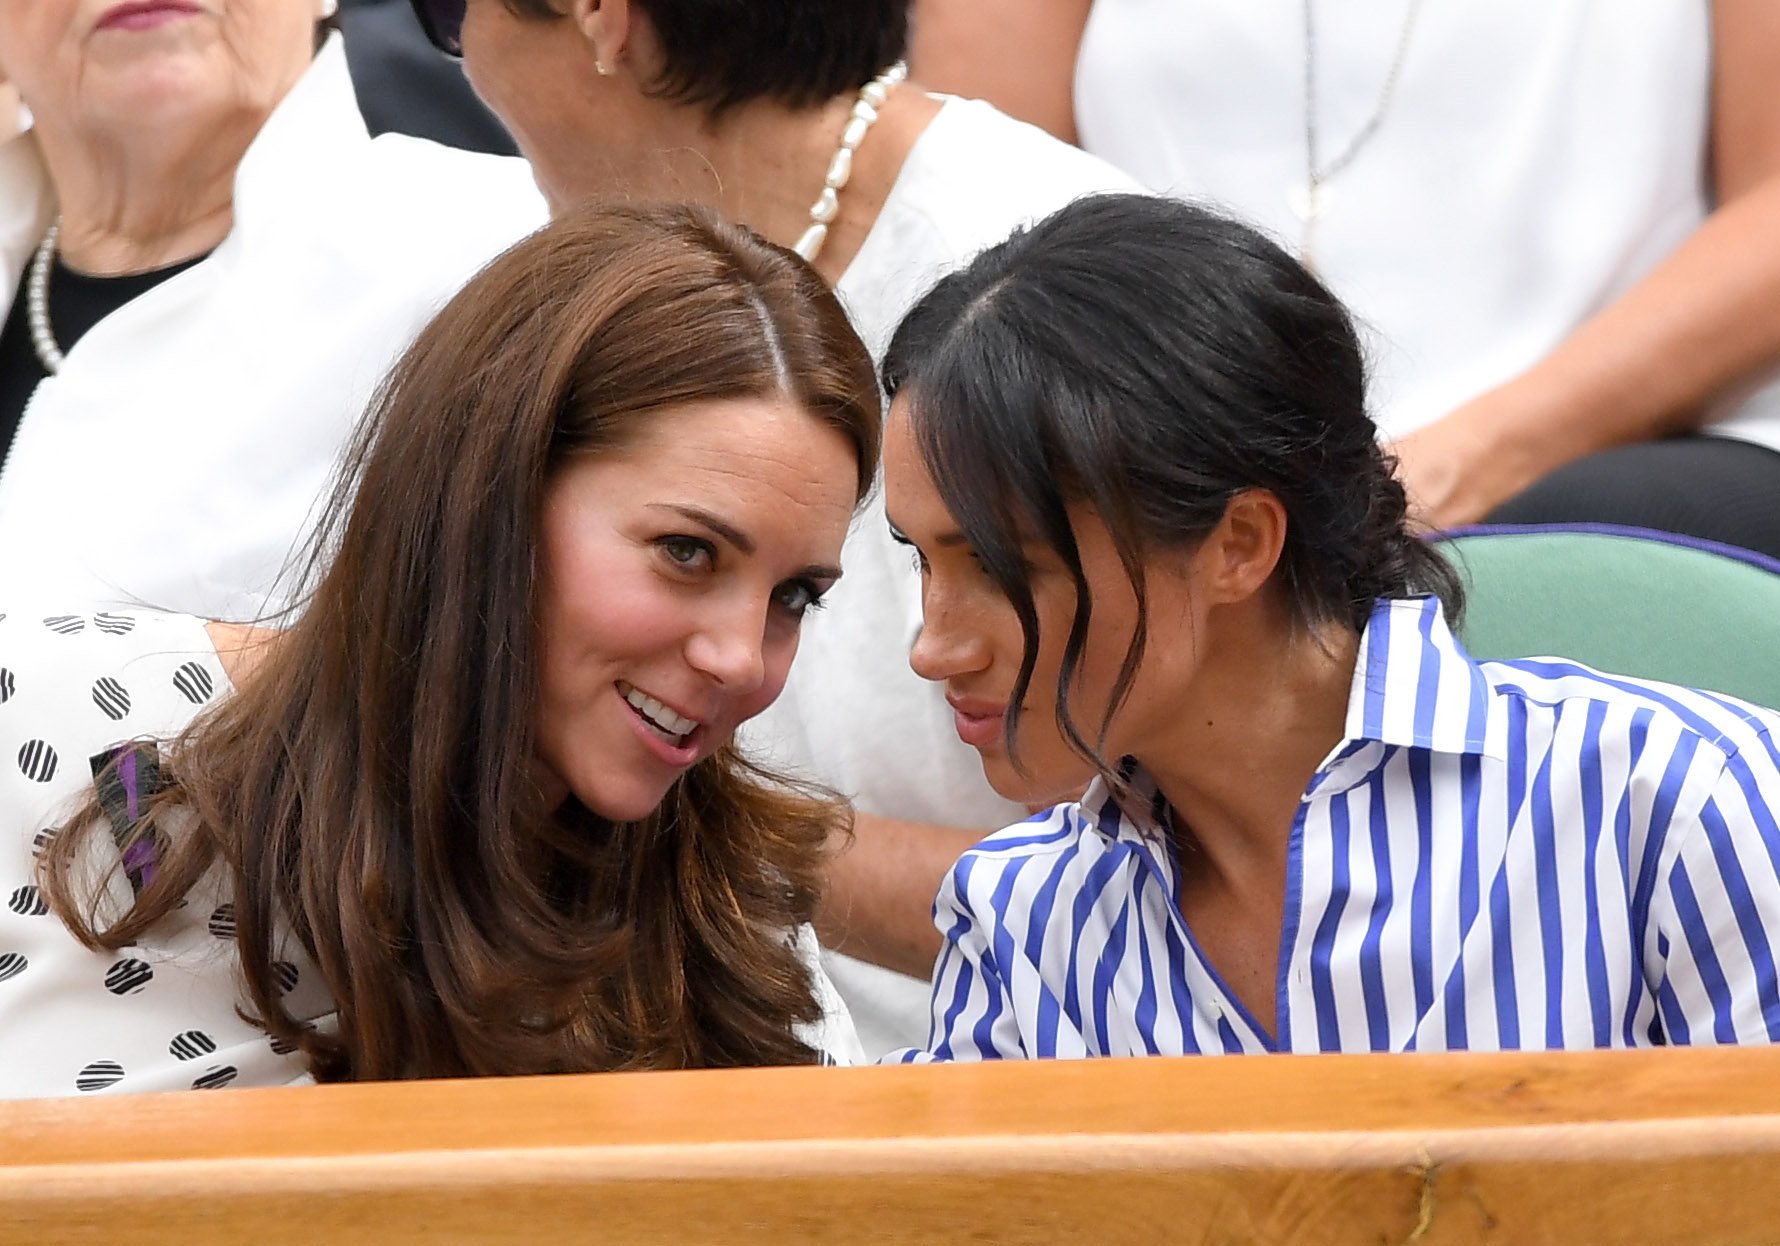 Kate Middleton and Meghan Markle during day twelve of the Wimbledon Tennis Championships at the All England Lawn Tennis and Croquet Club on July 14, 2018 in London, England. | Source: Getty Images